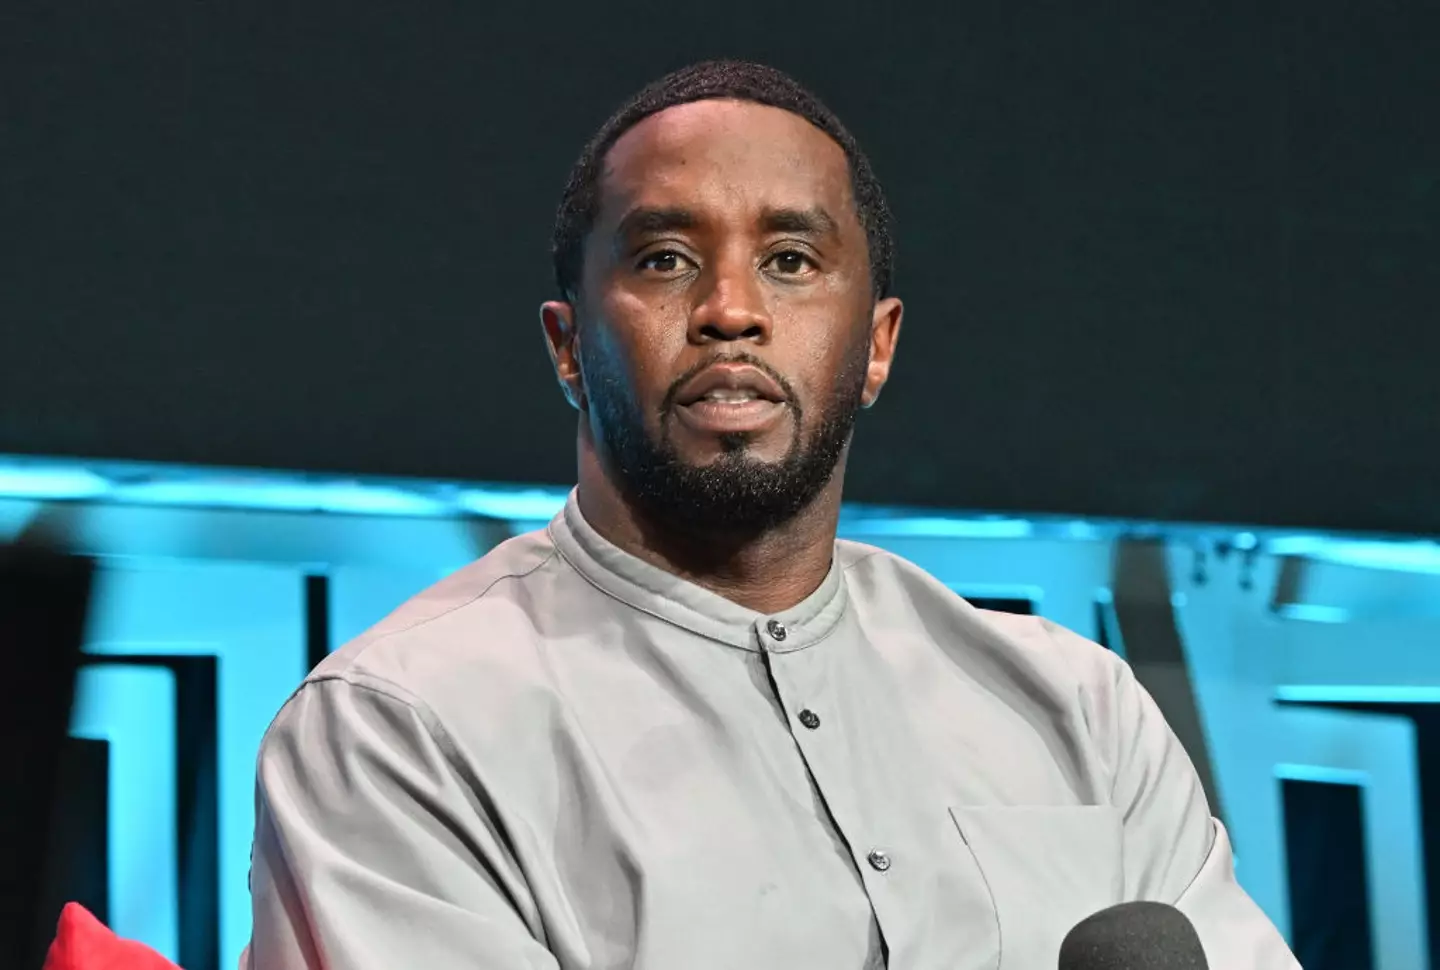 Diddy's homes have been raided  by federal agents in relation to a sex trafficking investigation.